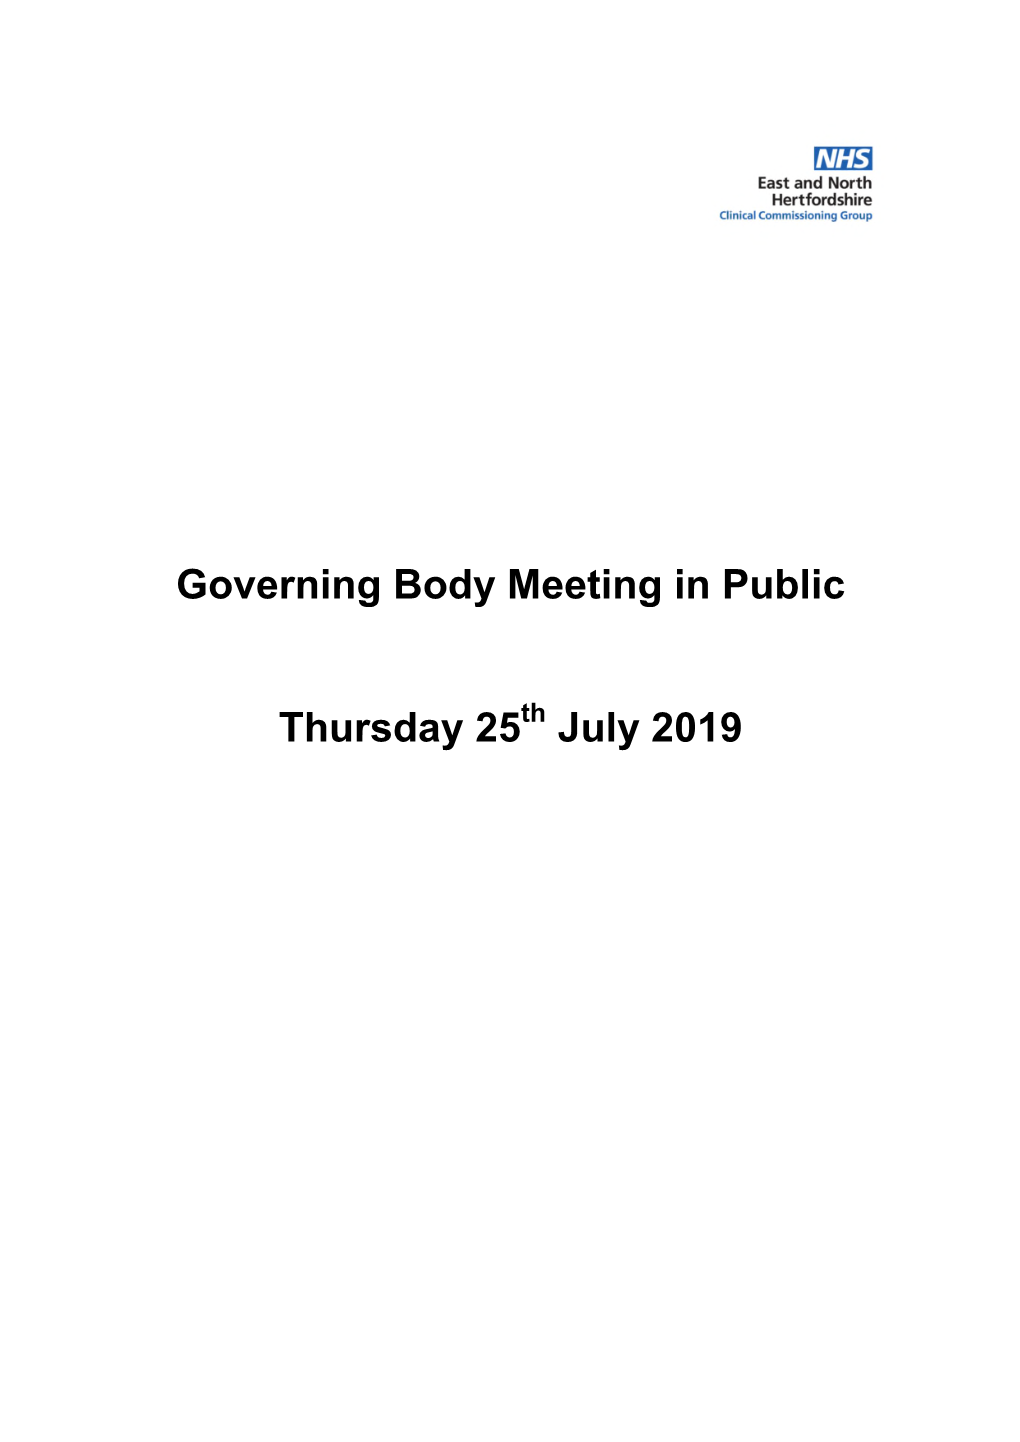 Governing Body Meeting in Public Thursday 25 July 2019